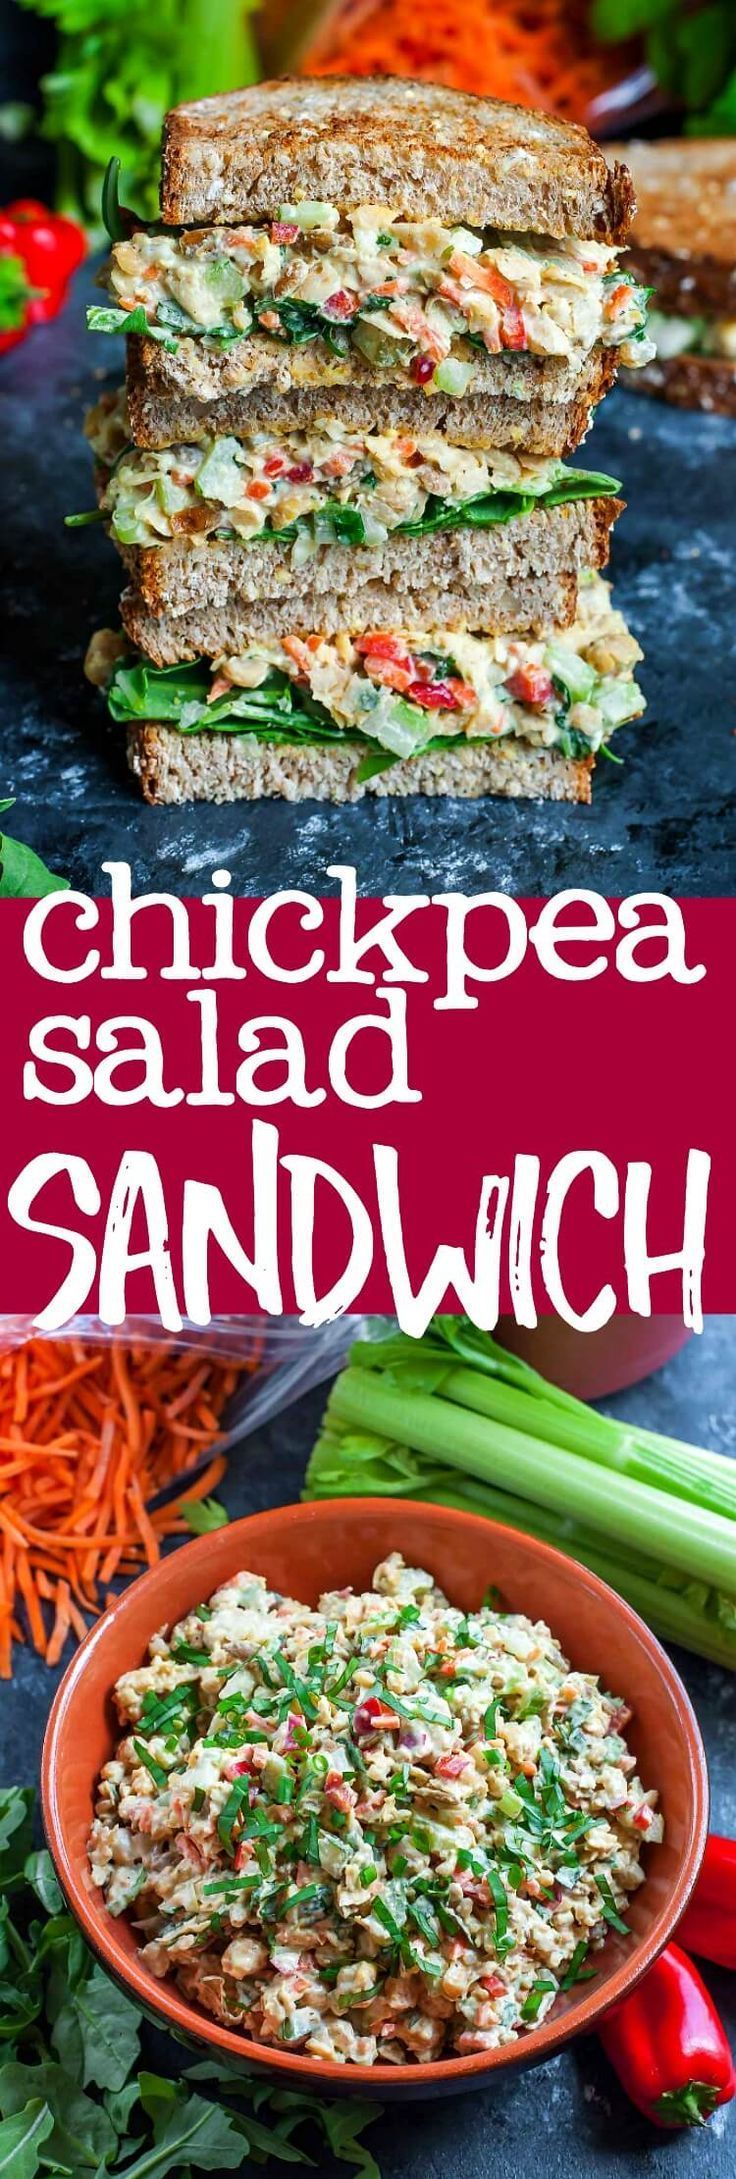 This tasty vegetarian Garden Veggie Chickpea Salad Sandwich is a plant-based powerhouse of a lunch! Make it in advance for a party